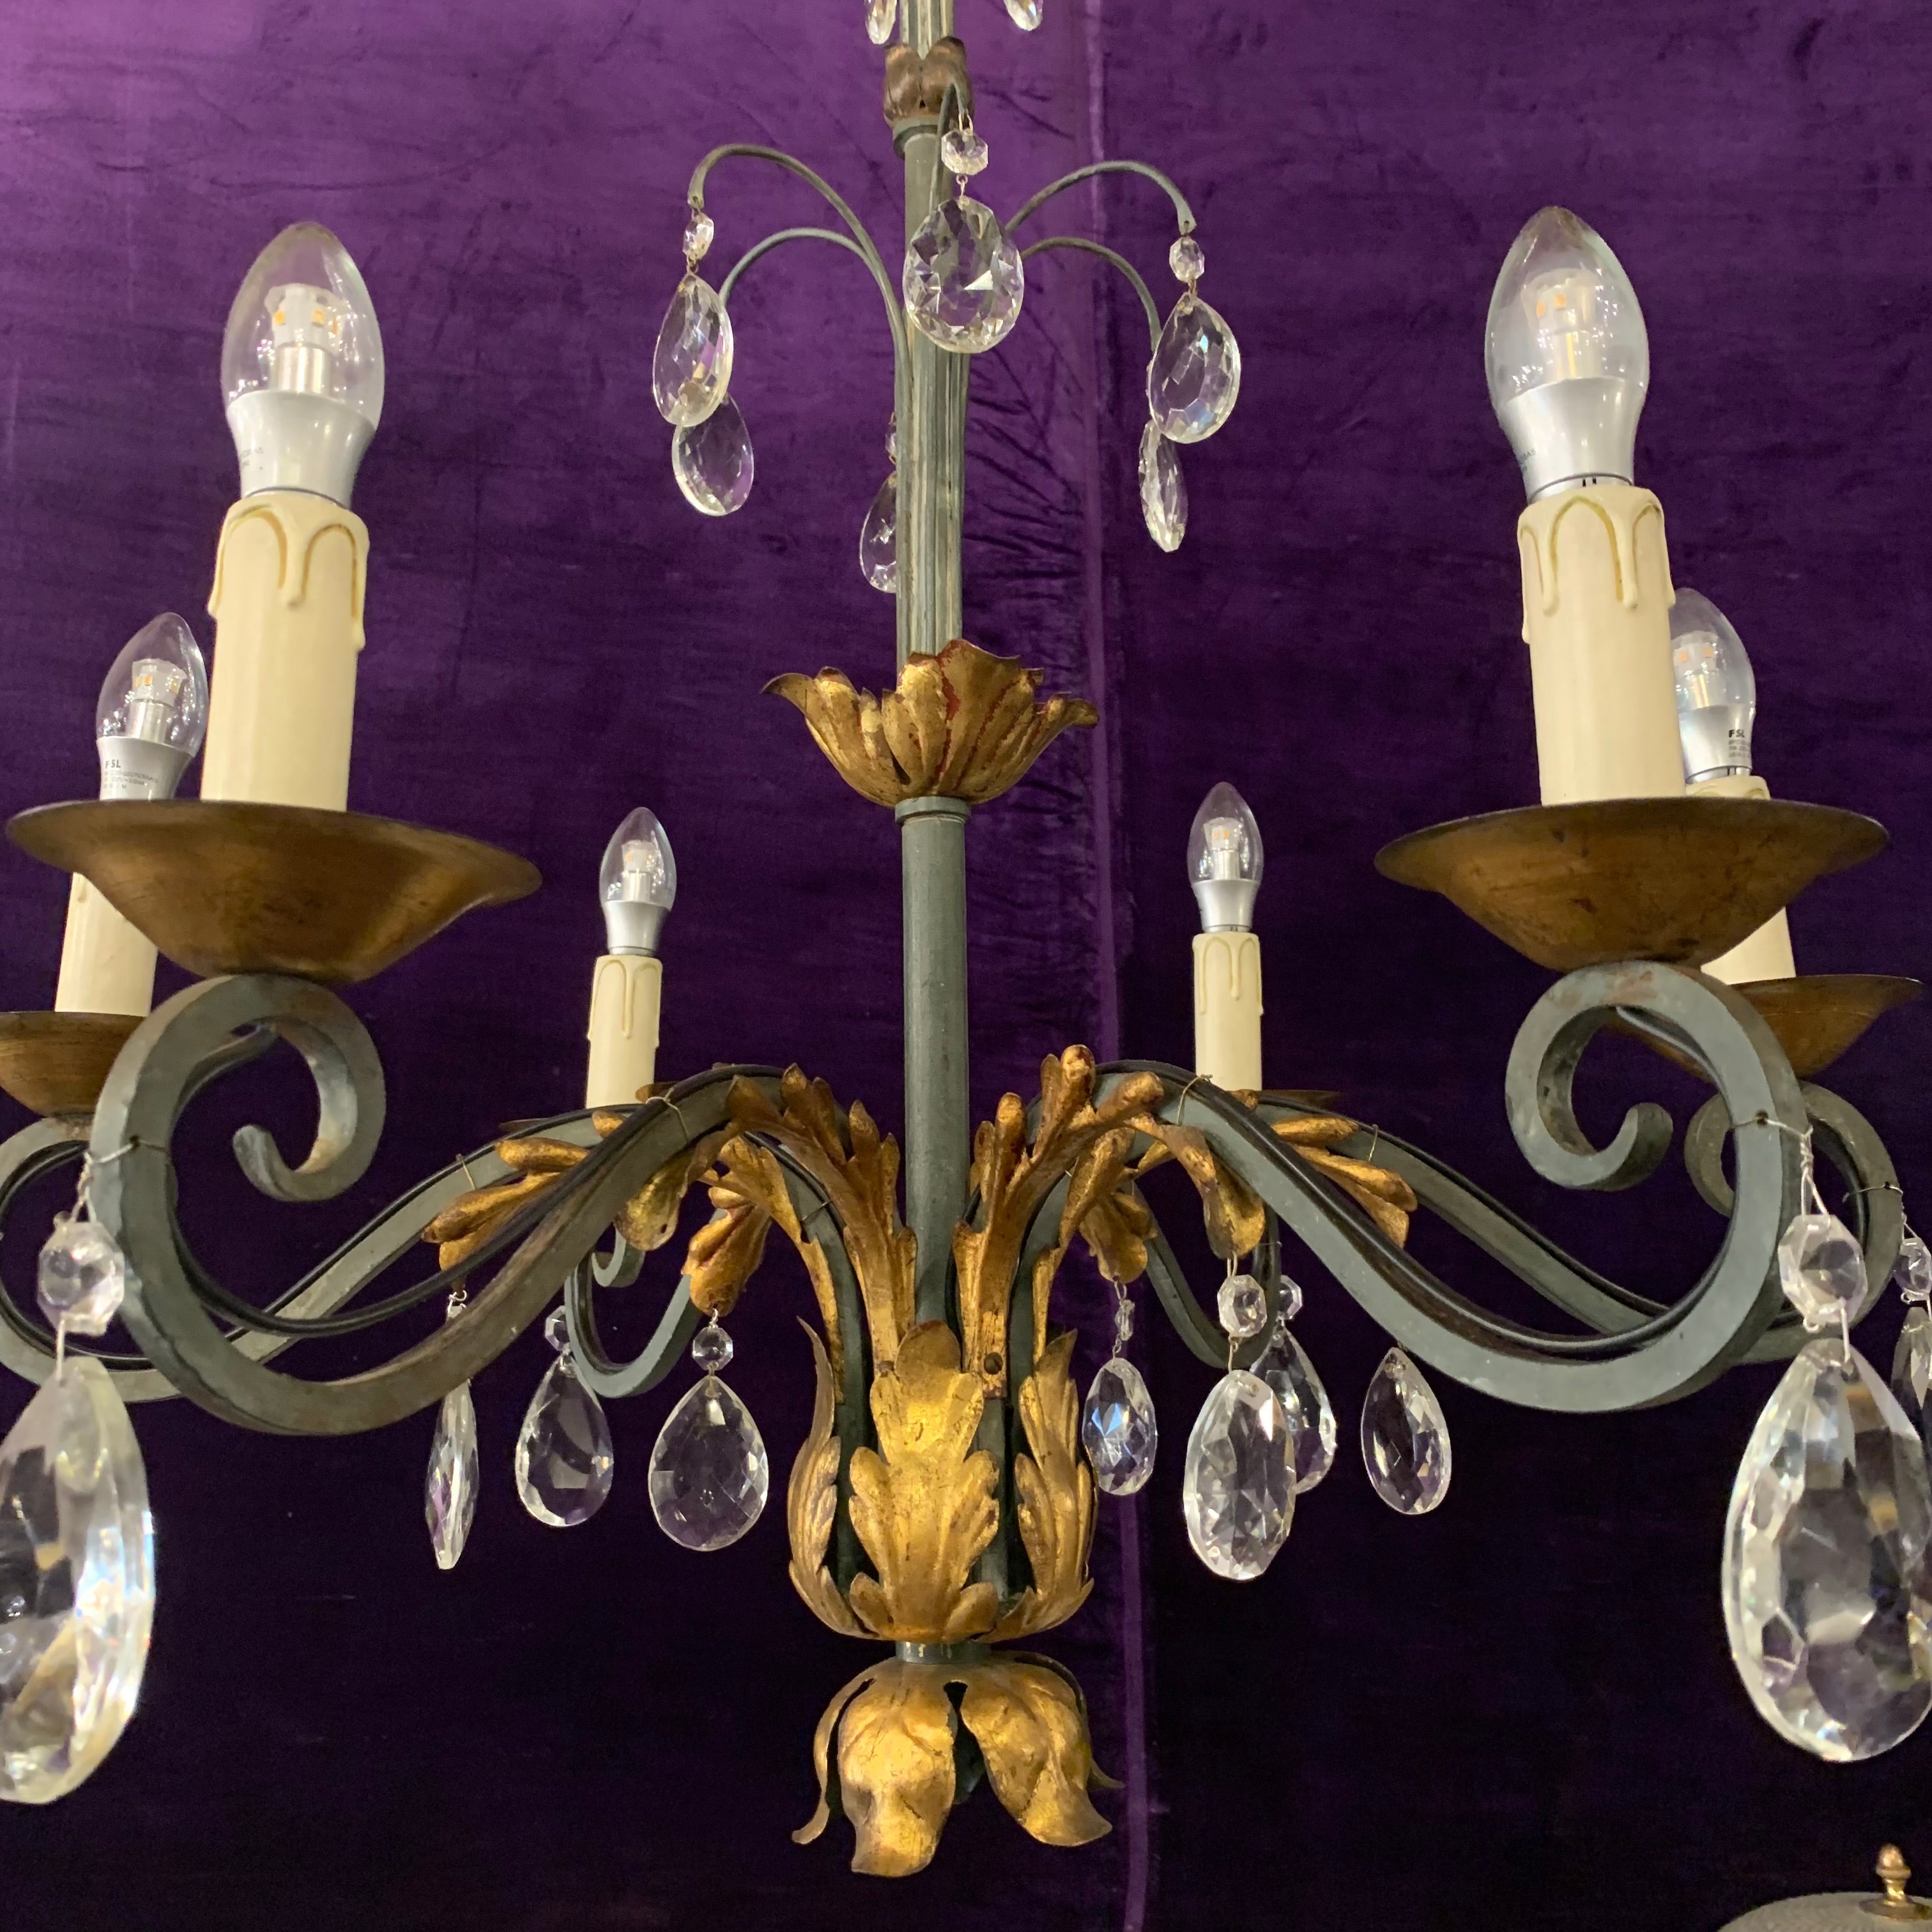 Wrought Iron Chandelier with Gold Leaf Details